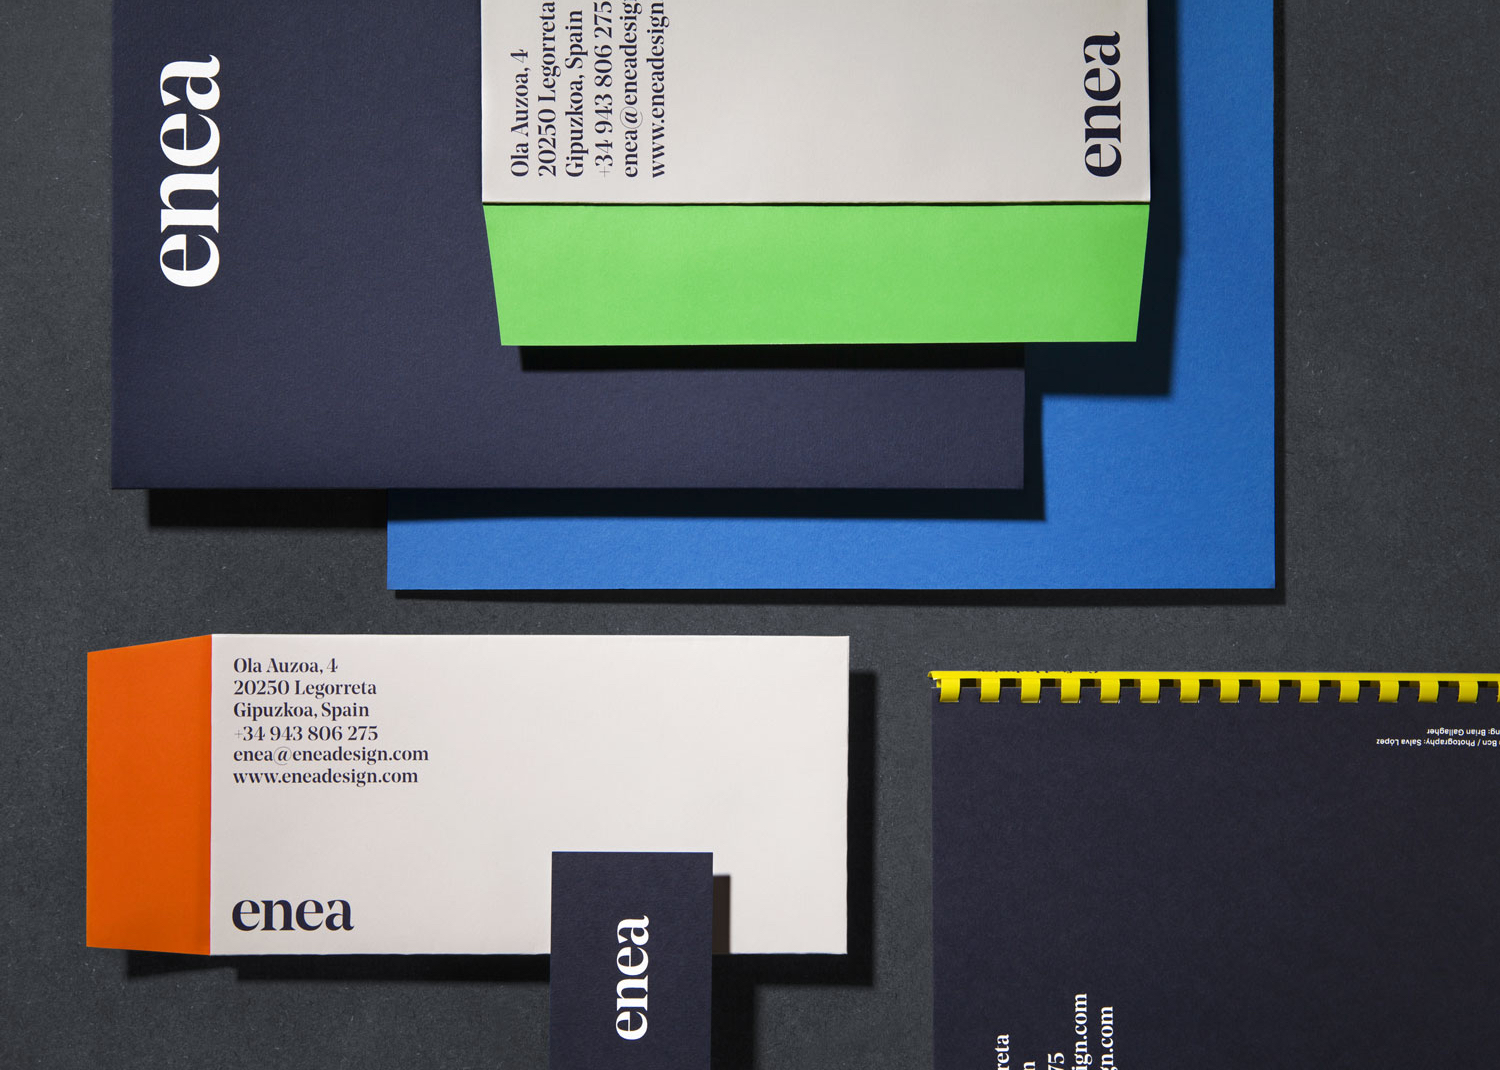 Material Thinking in Branding — Enea by Clase bcn, Spain